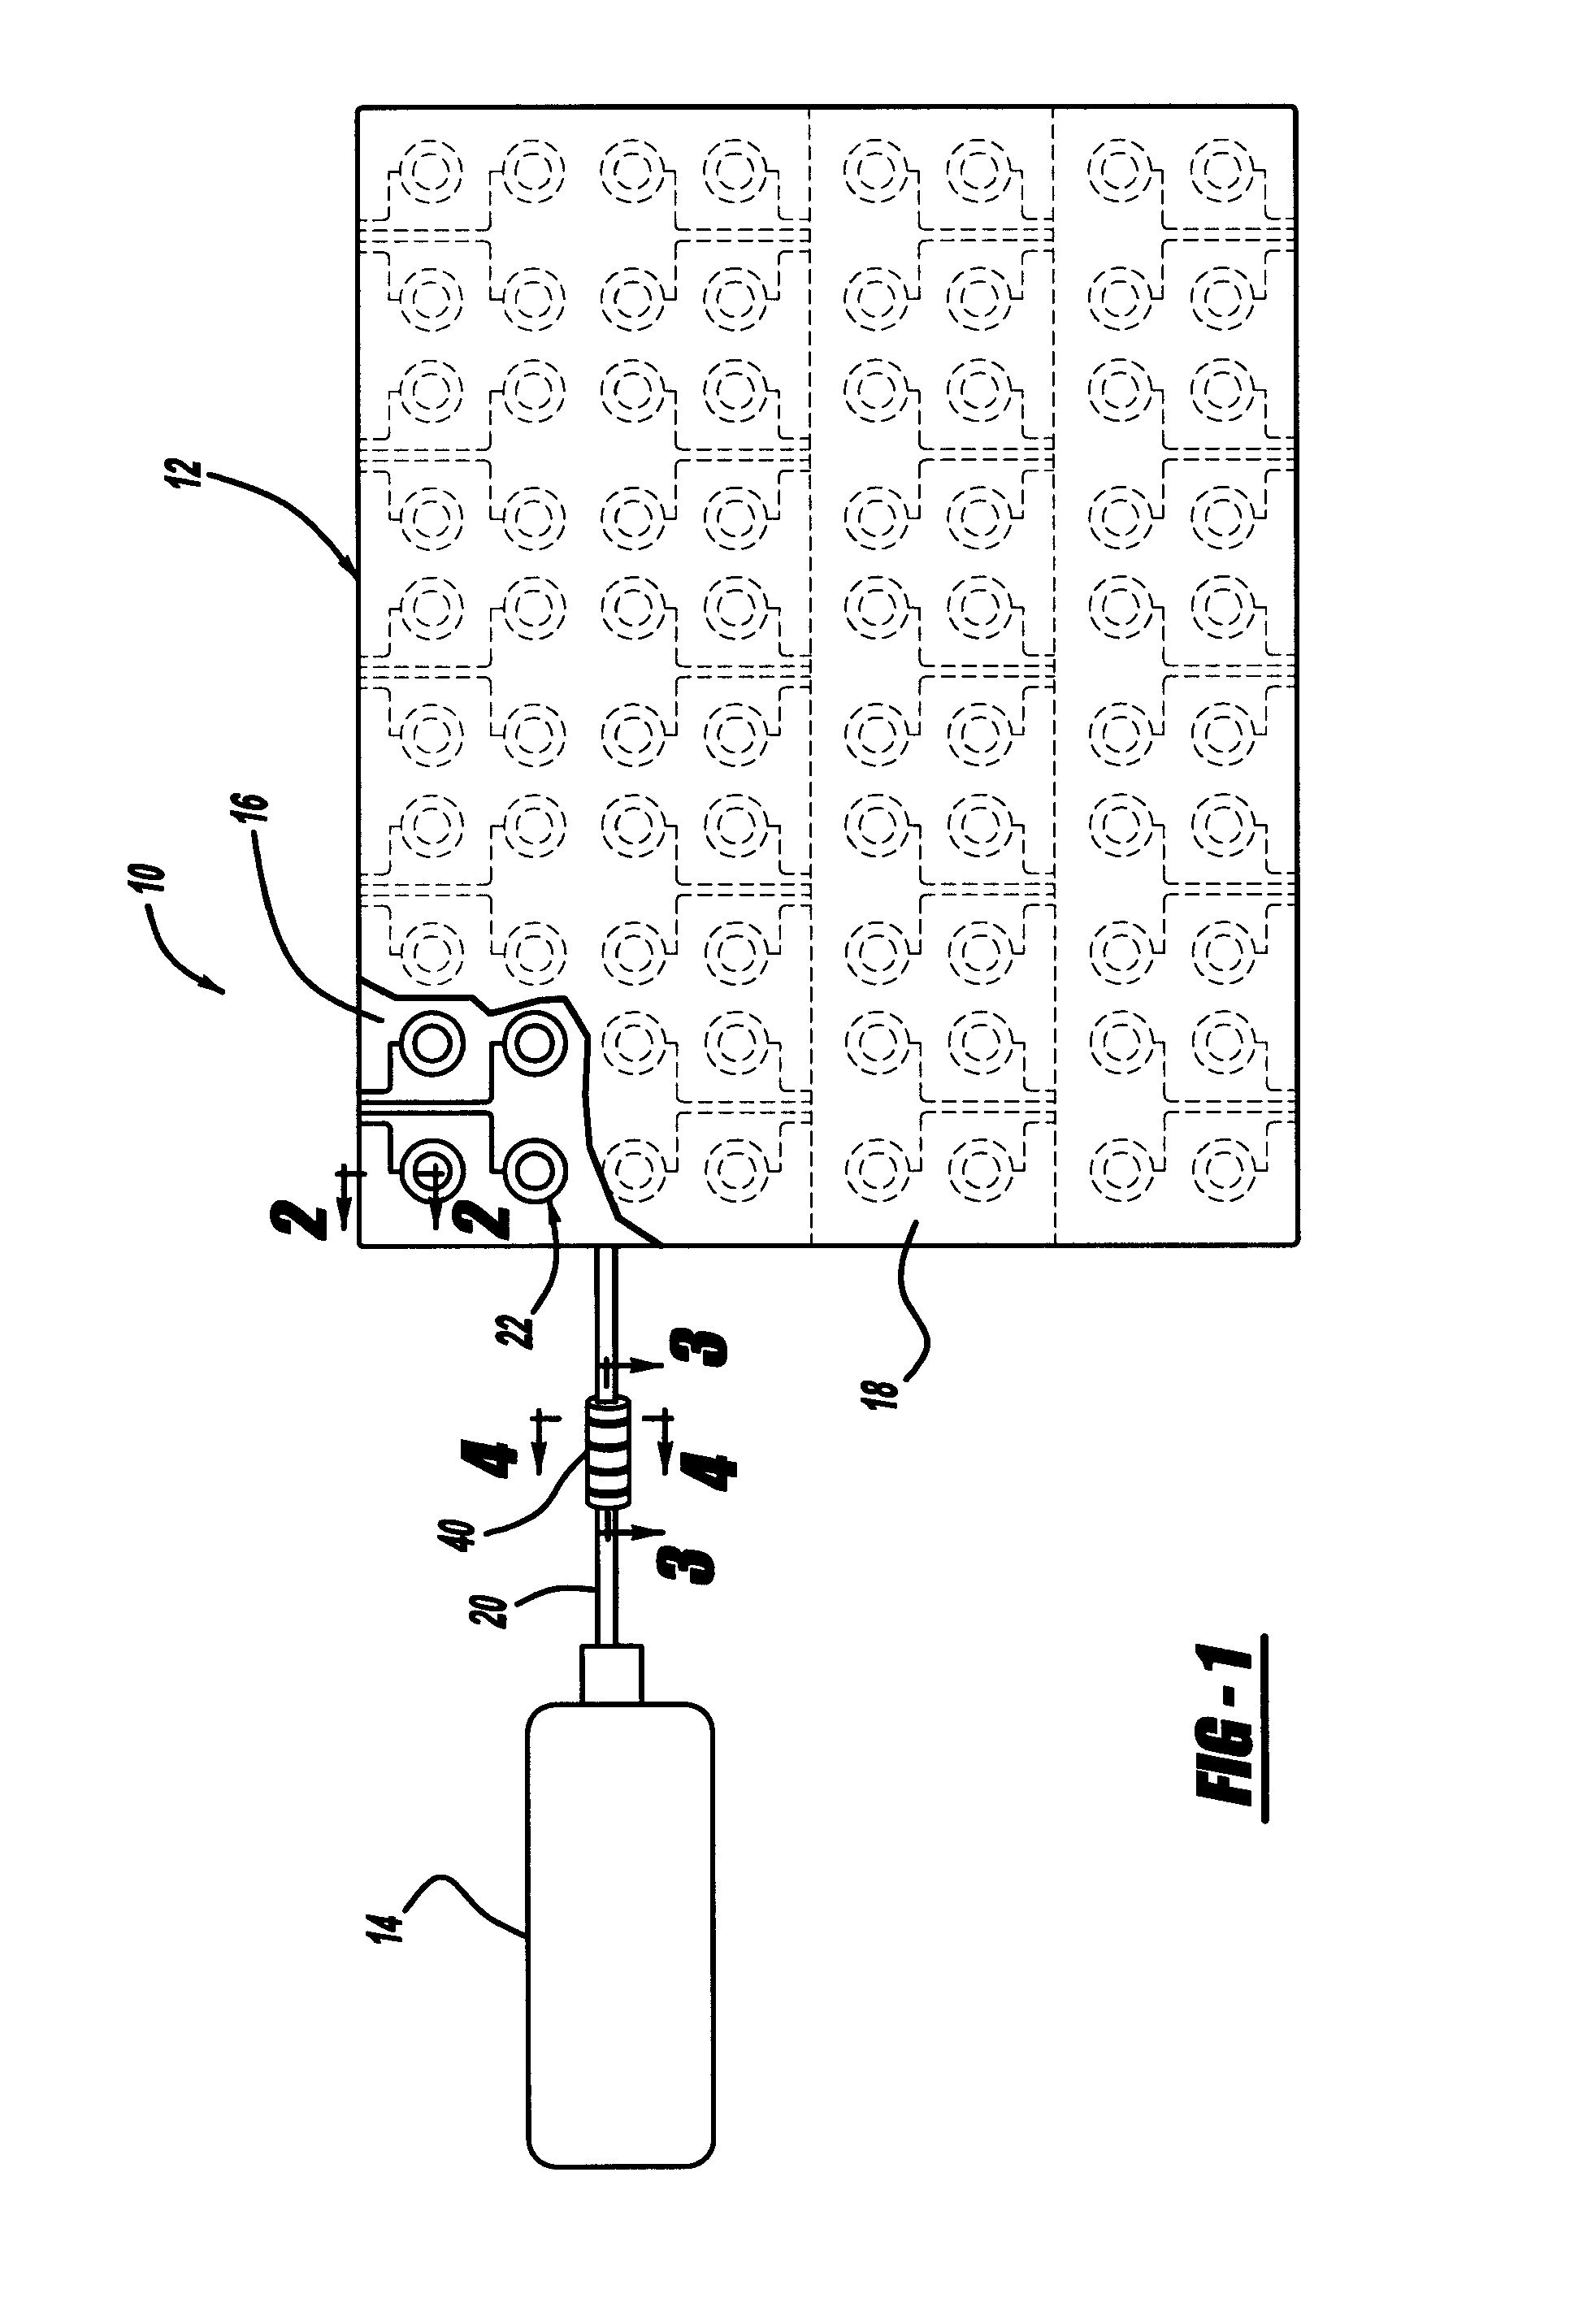 Fuel cell stack and hydrogen supply including a positive temperature coefficient ceramic heater